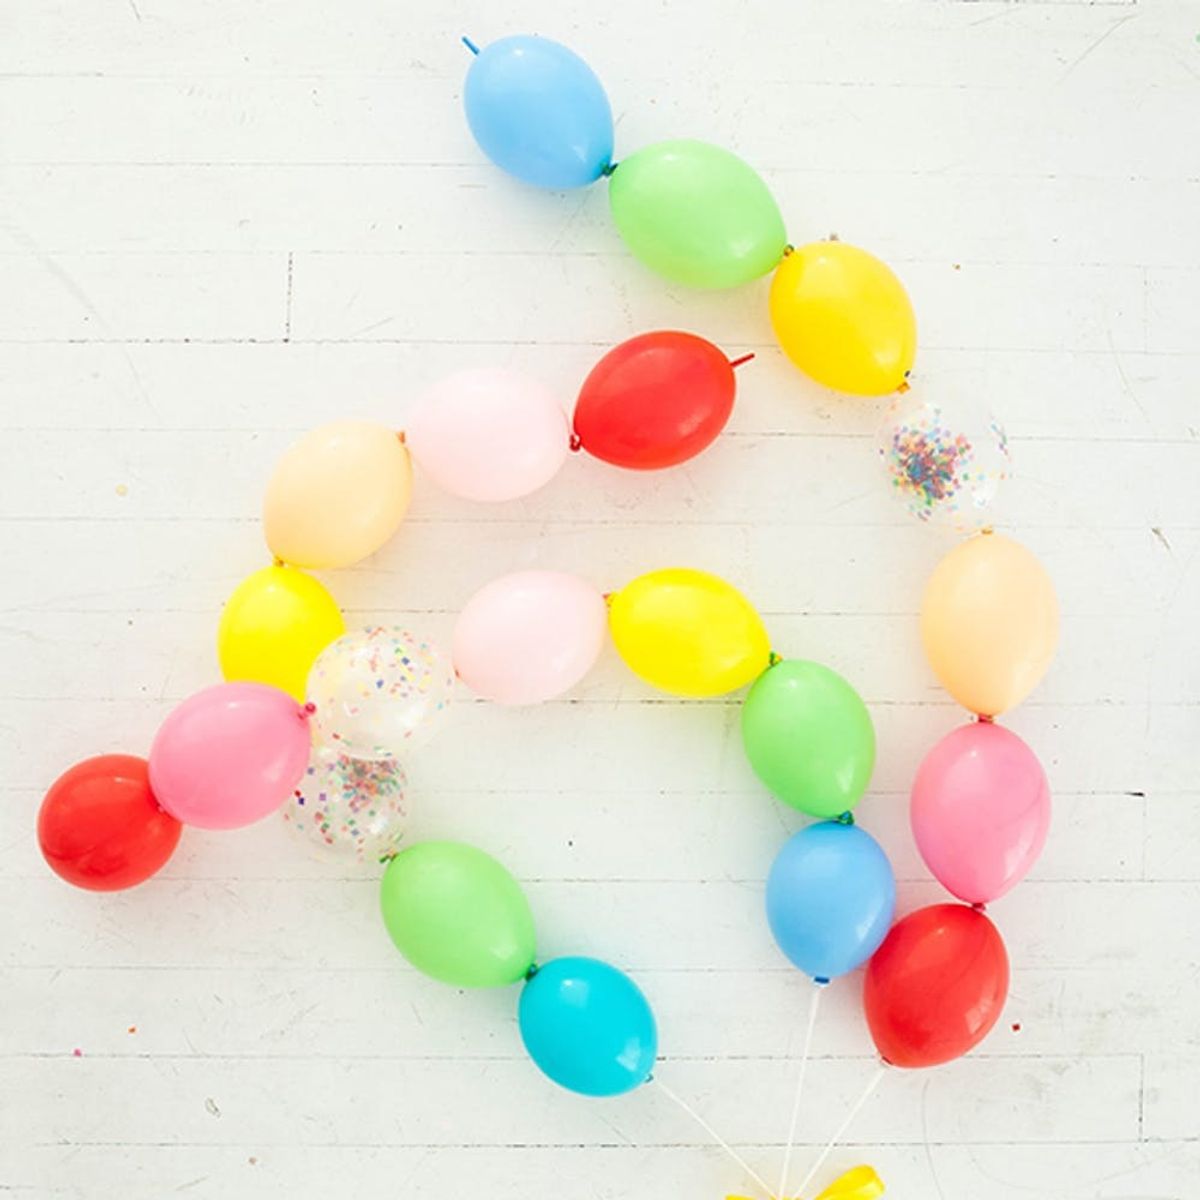 This Balloon Party Trend Will Bring the Magic to Your Next Get-Together